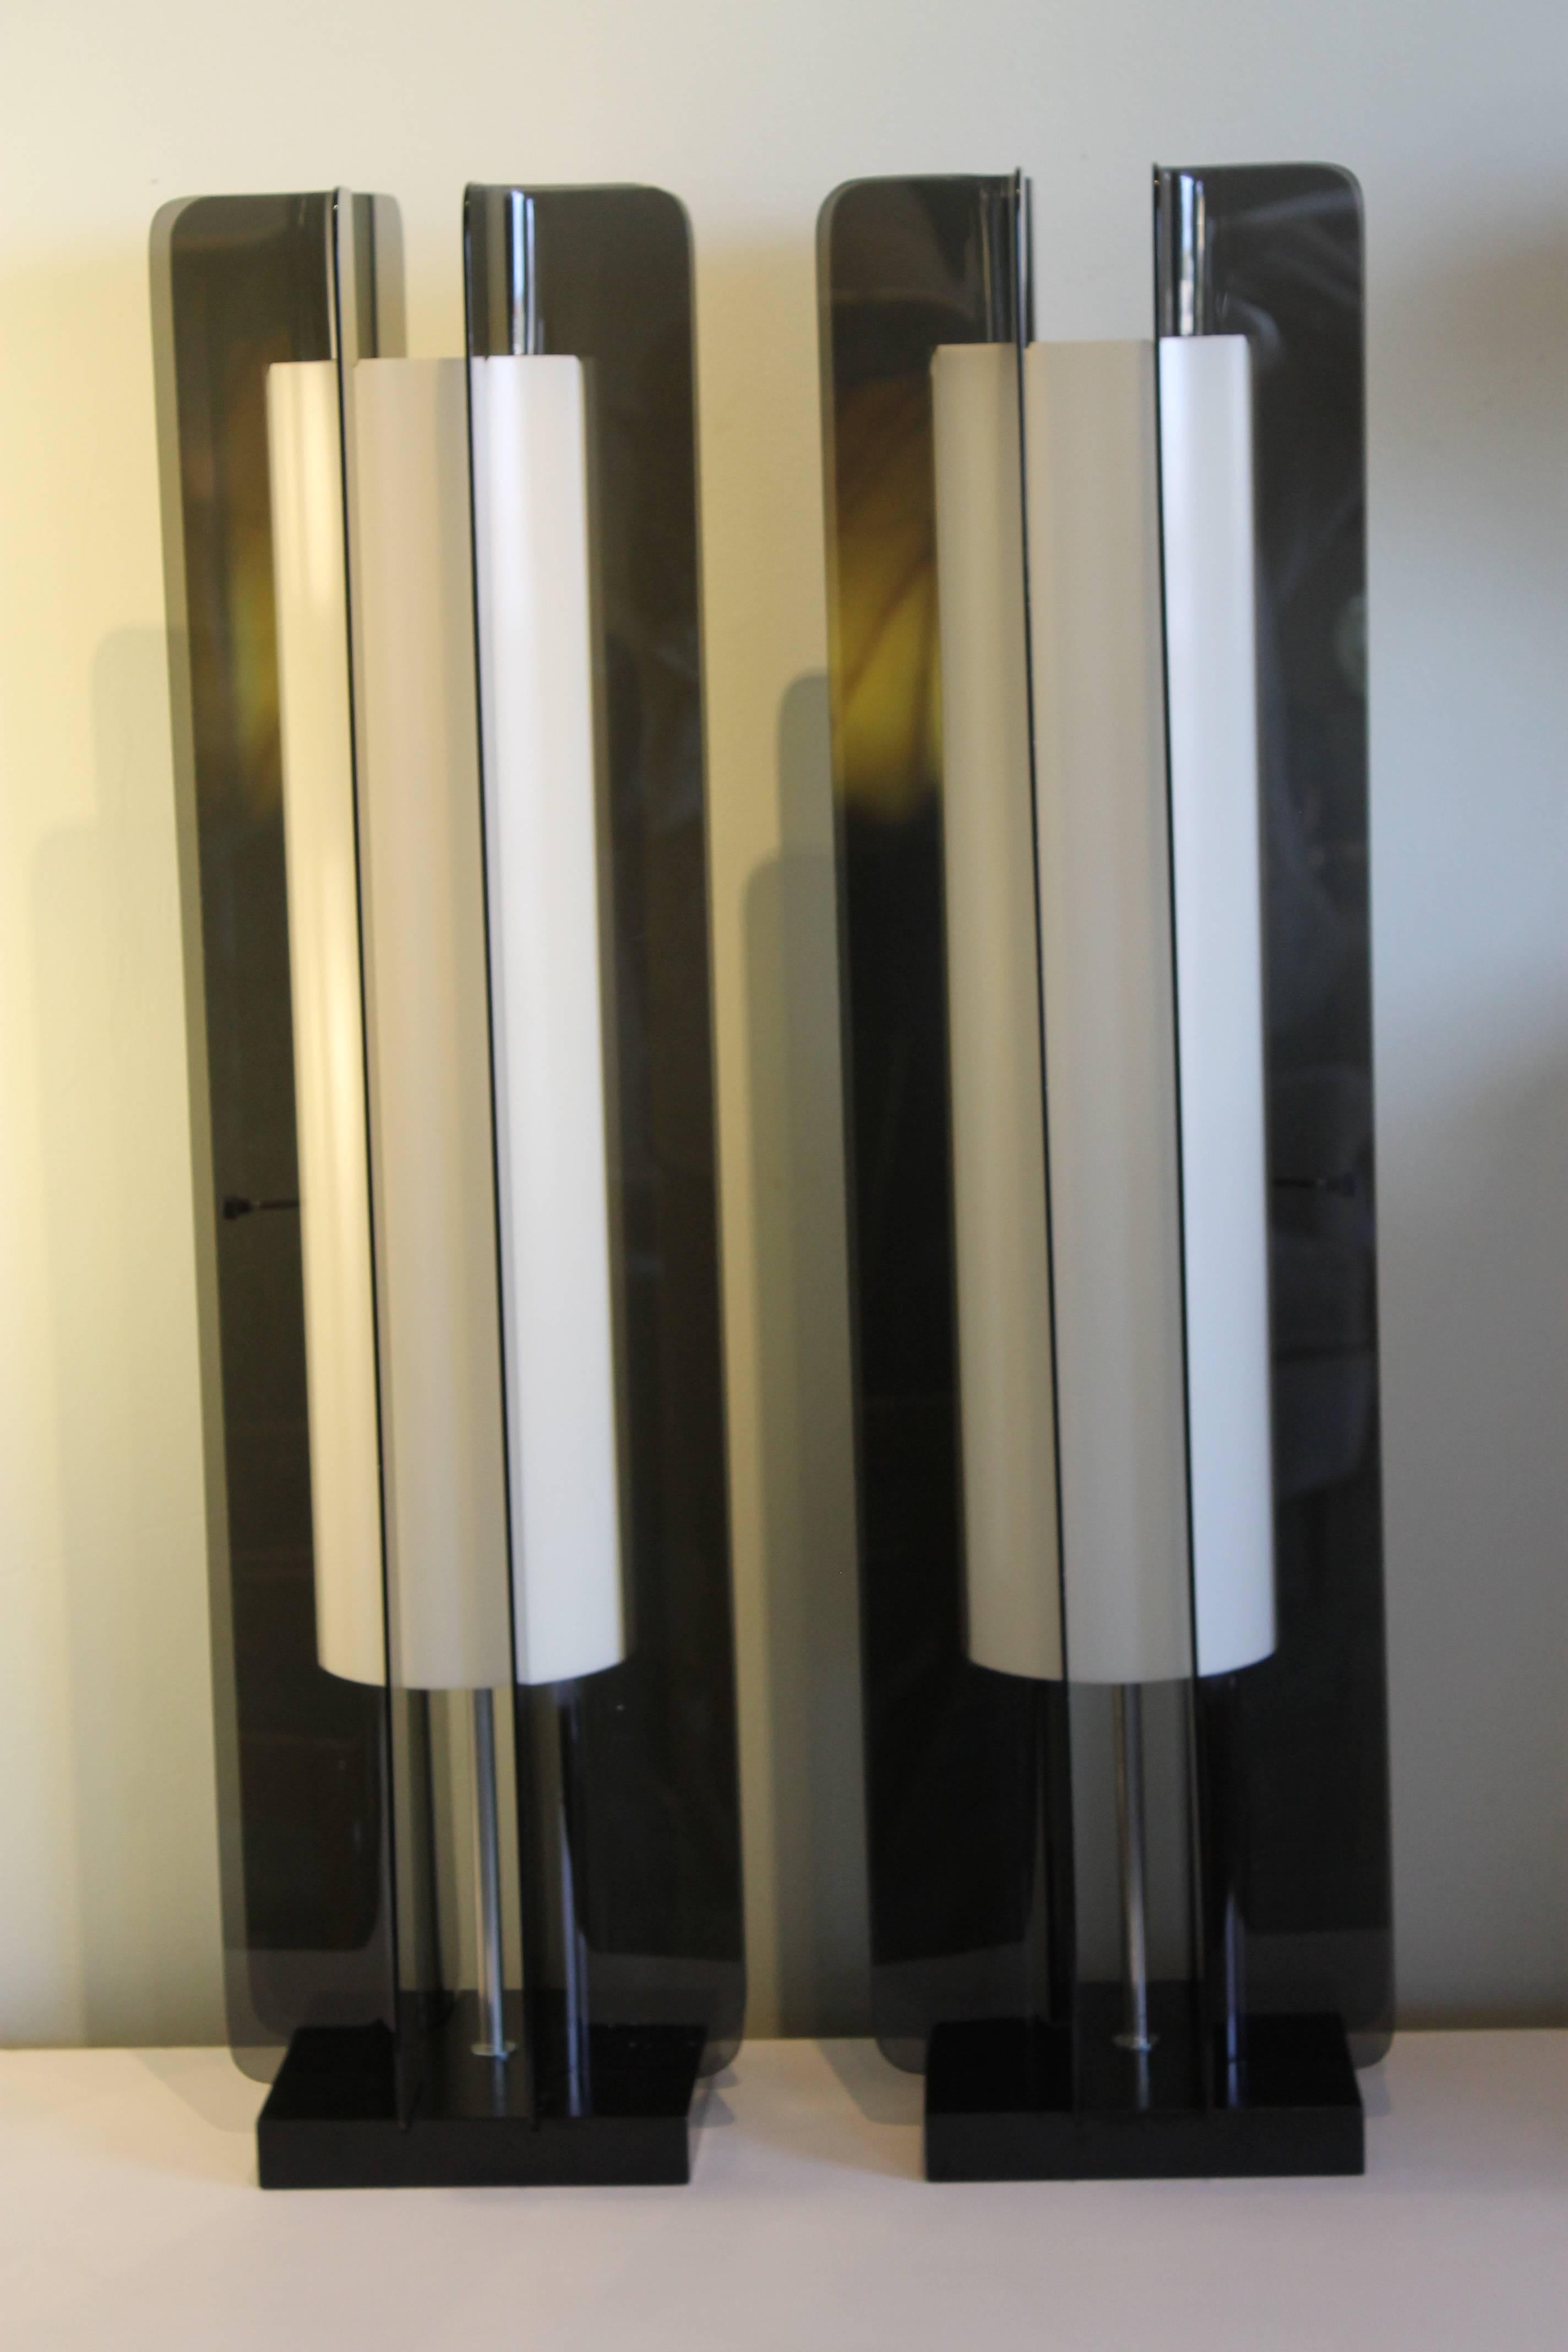 Matched pair of circa 1970s tall table lamps. White plastic cylinders are surrounded by four smoke colored clear Lucite walls and mounted on black painted wooden bases. Lamps are newly refurbished and rewired with three-way switches. Total height is